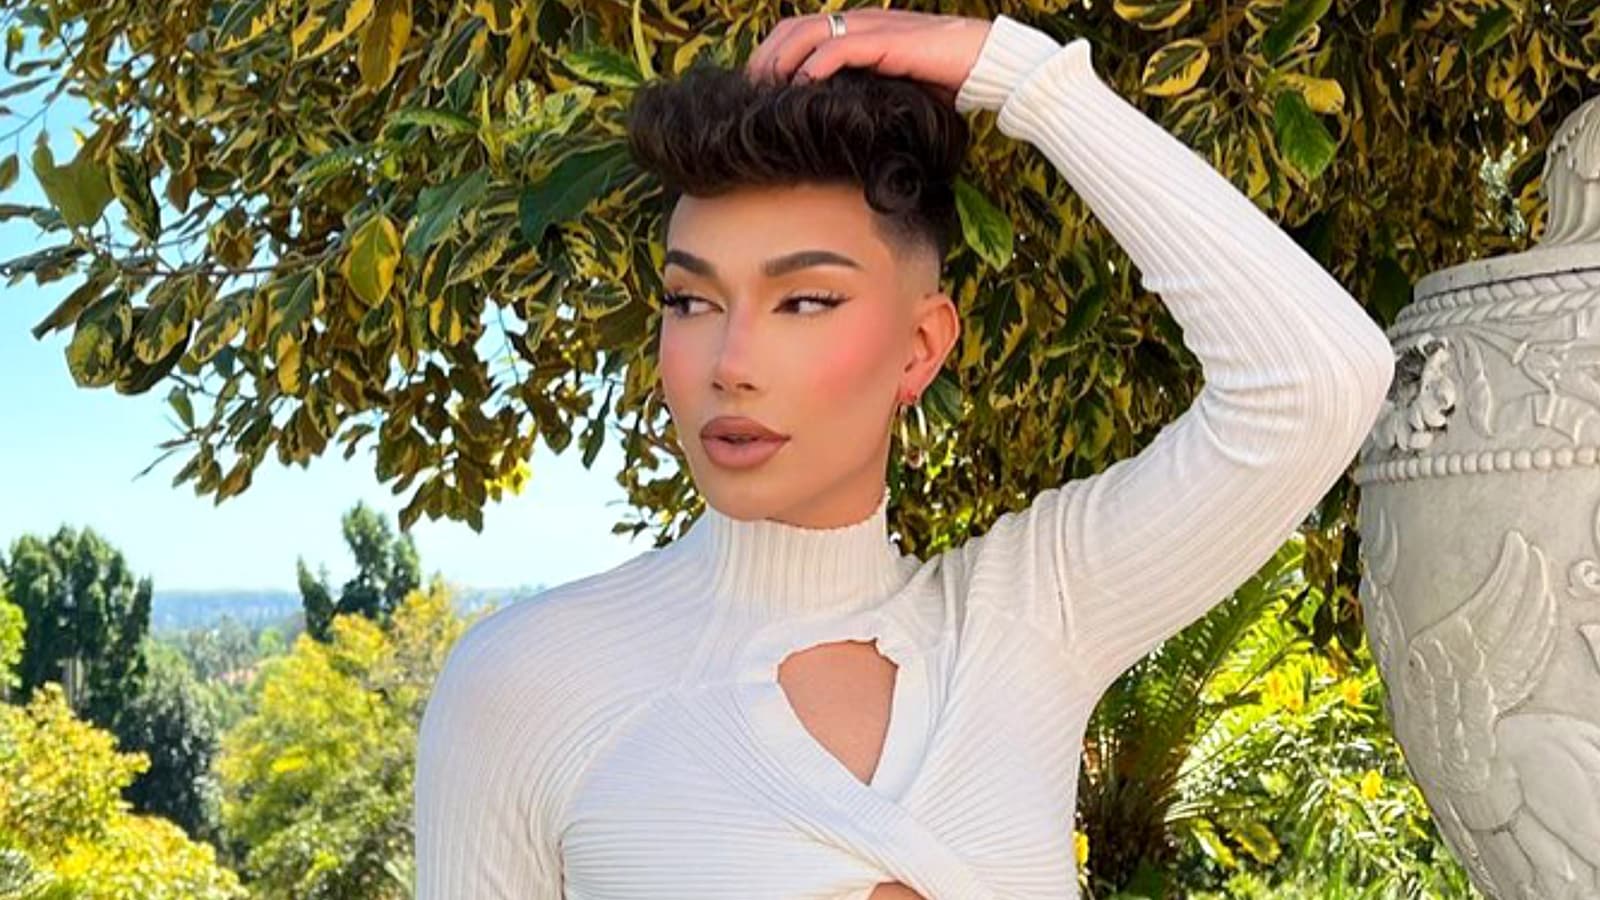 James Charles posing for a picture